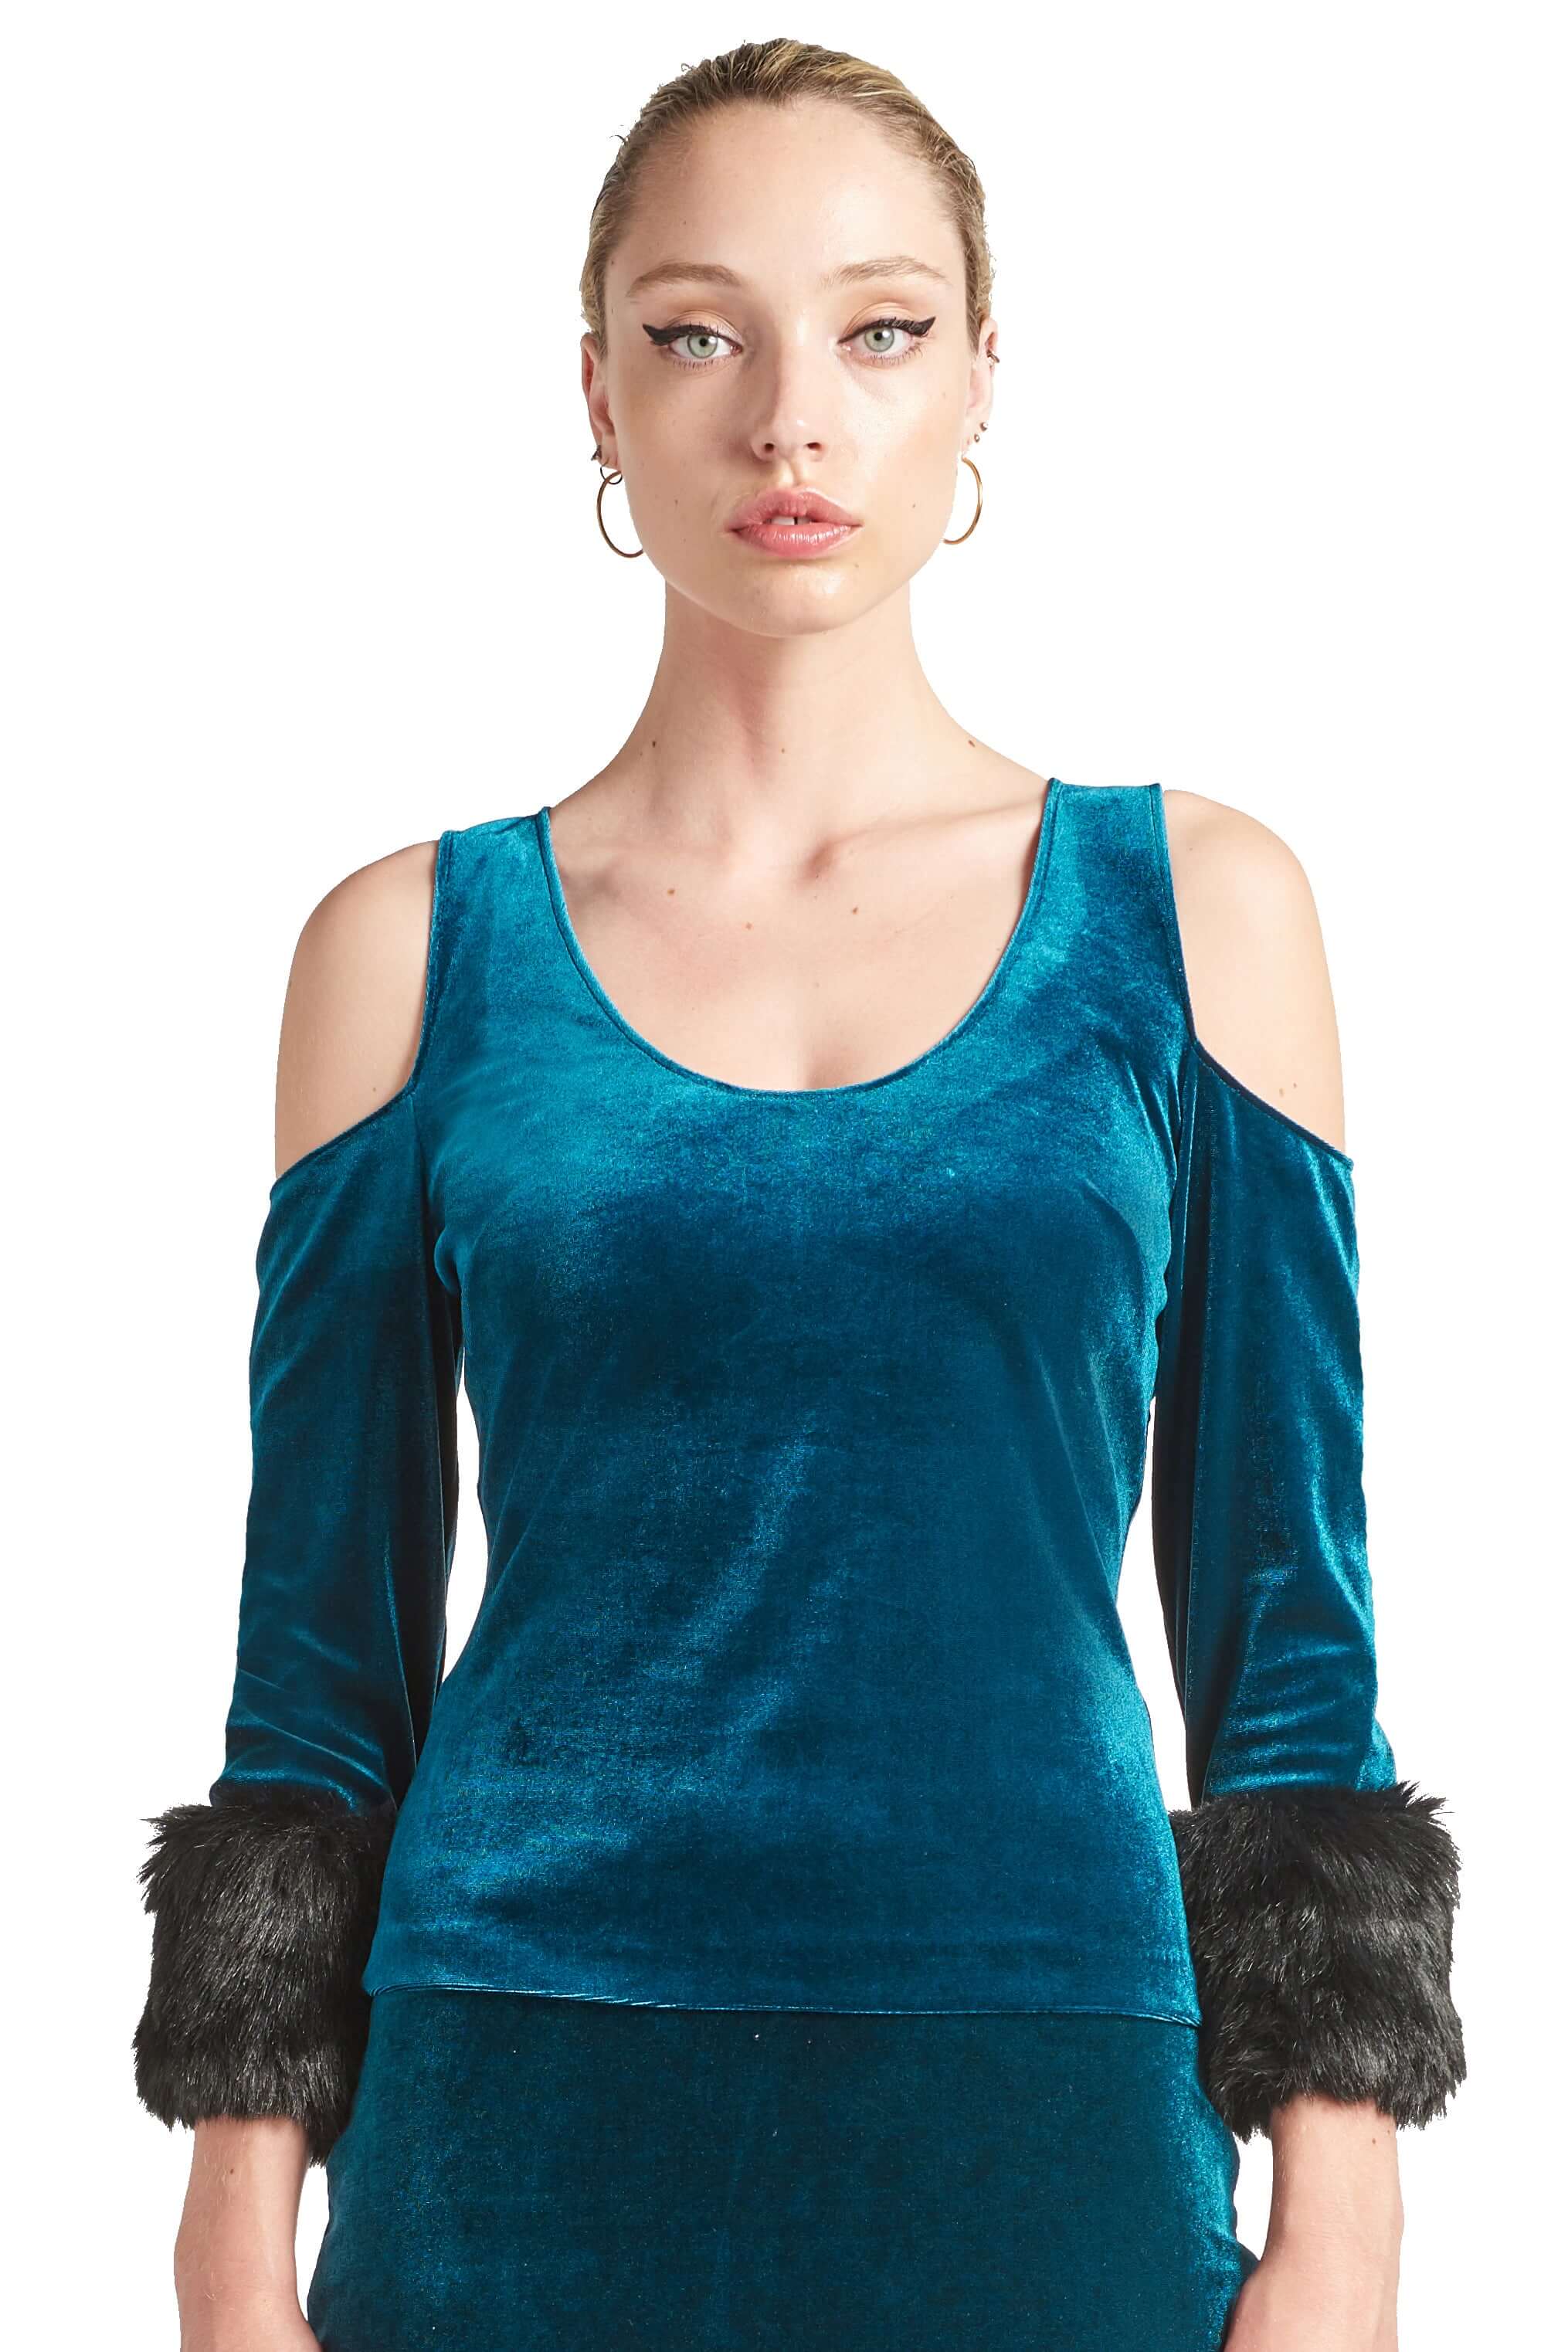 Front view of model wearing the Simona Maghen Mia Top, teal stretch velvet cut-out cold shoulder top with u-neckline, 3/4 sleeves and black faux fur cuffs.